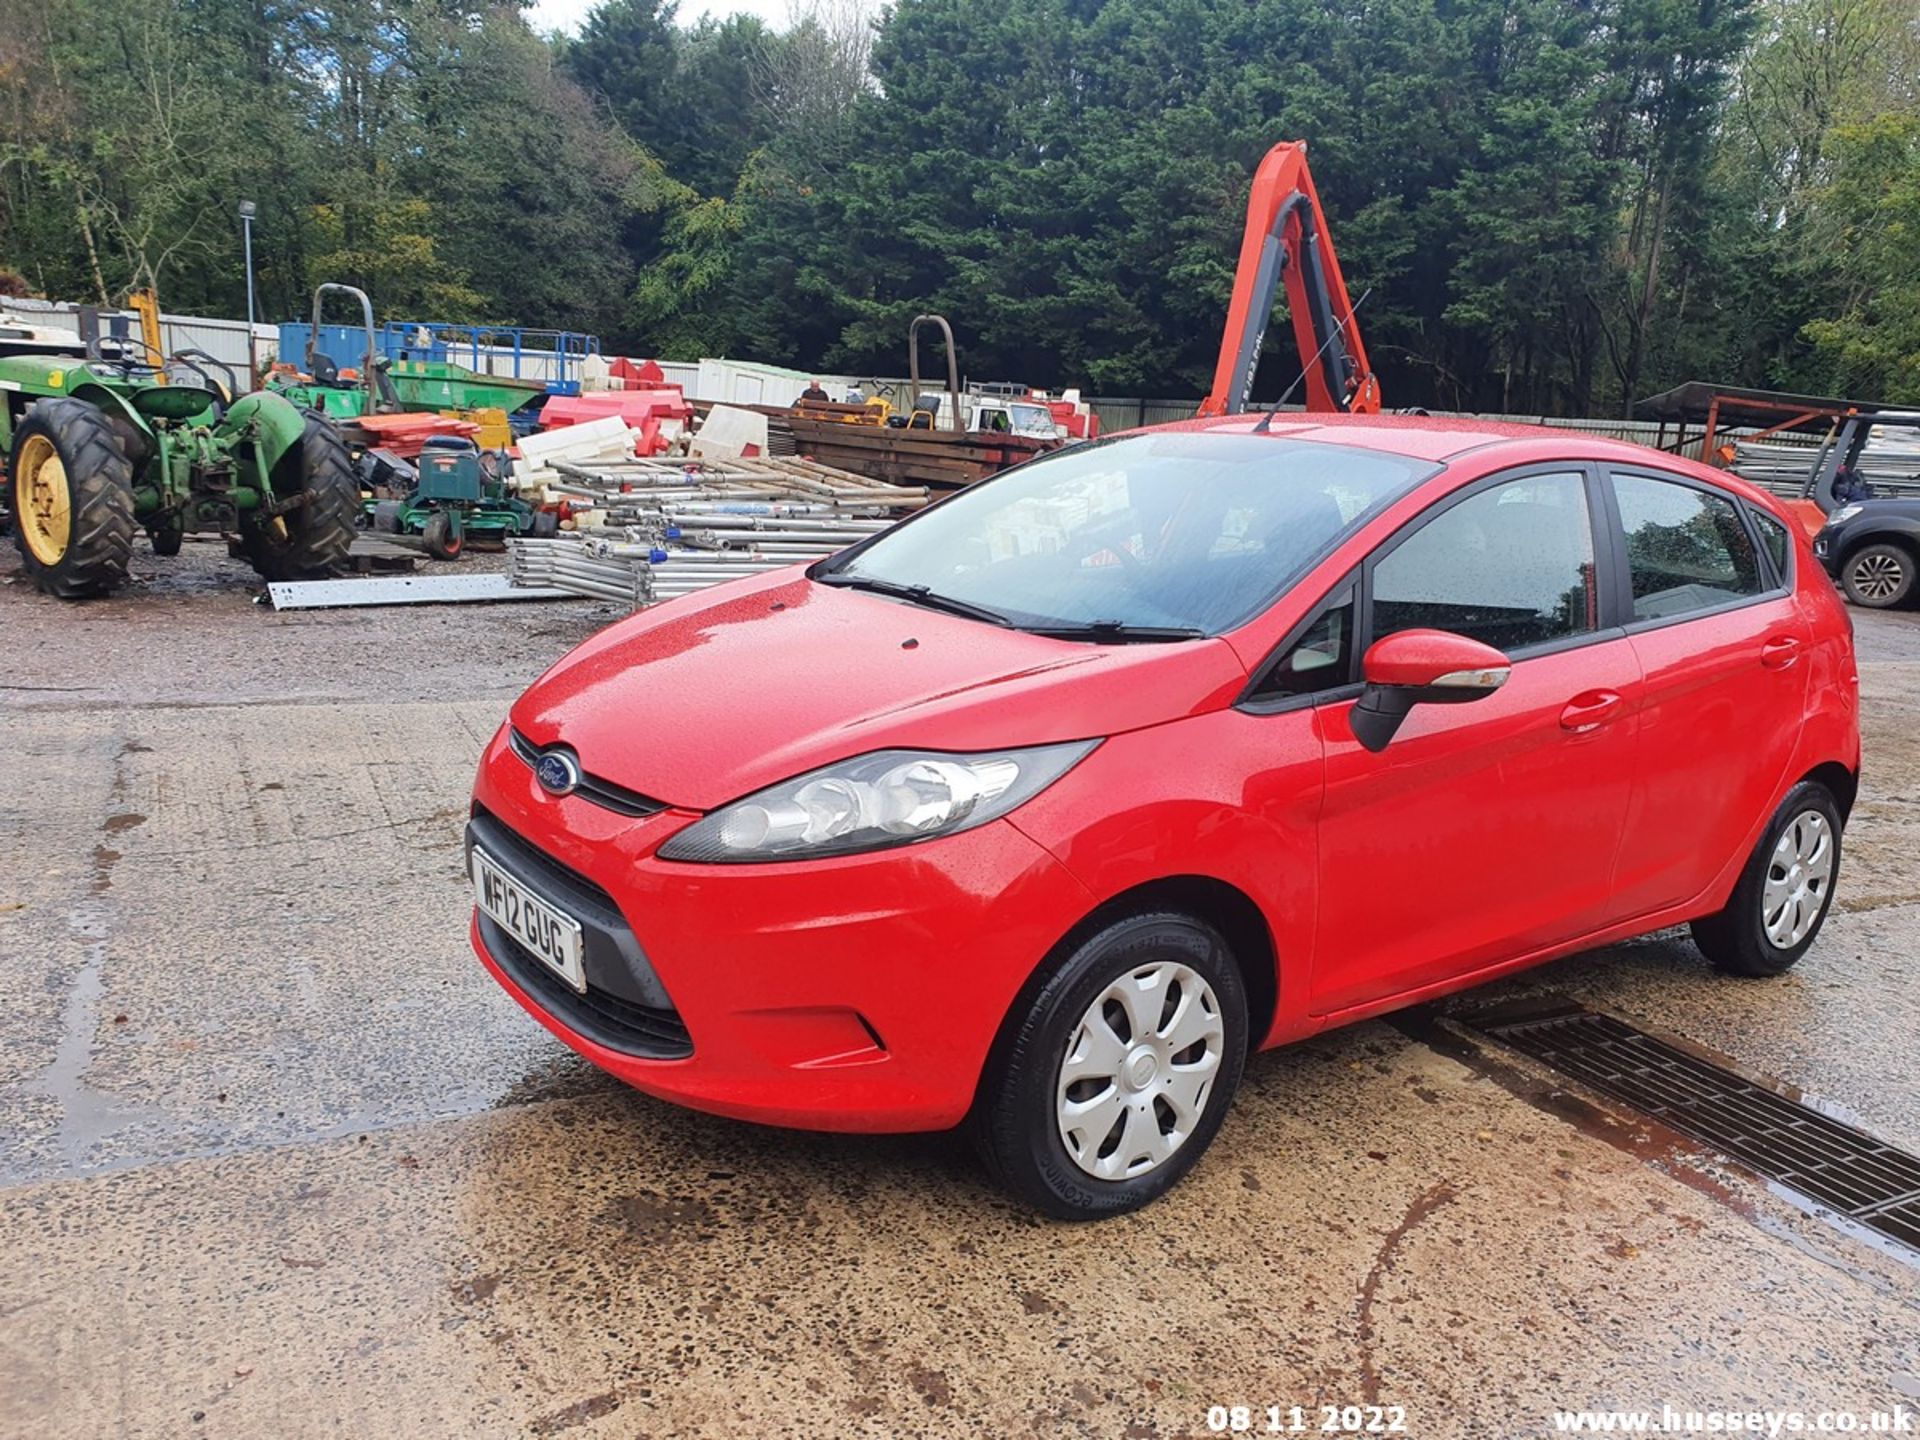 12/12 FORD FIESTA EDGE ECONETIC II T - 1560cc 5dr Hatchback (Red, 173k) - Image 34 of 59